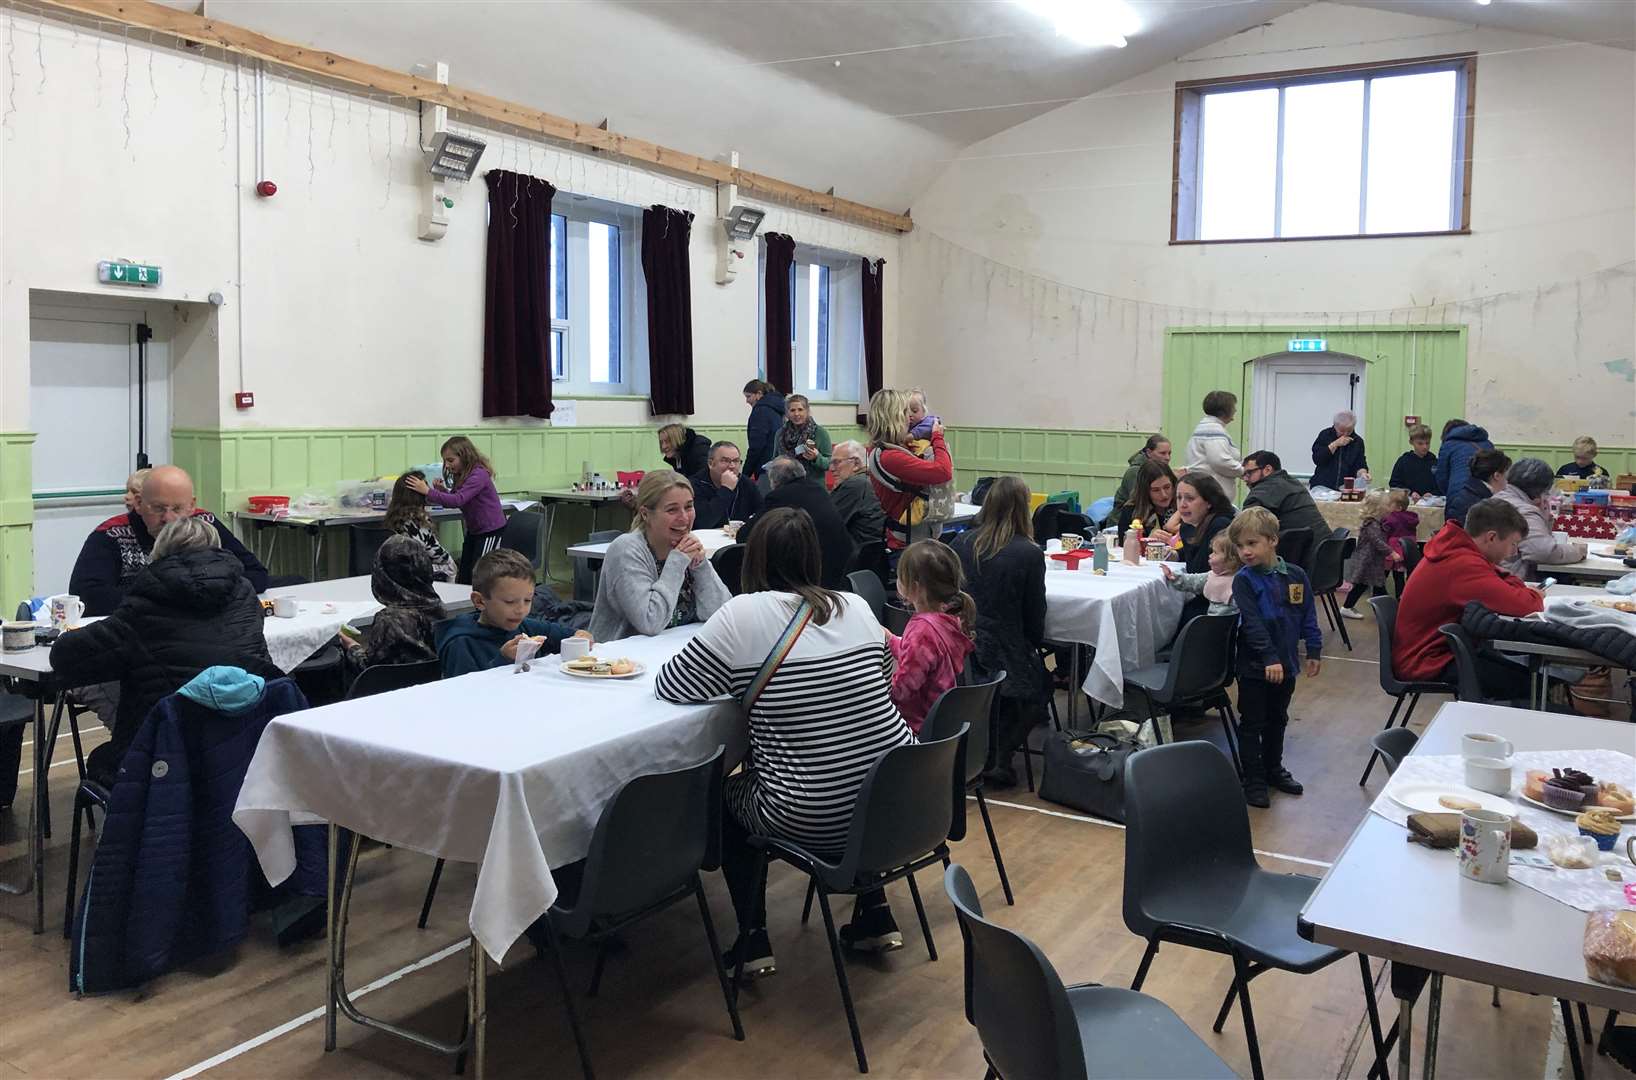 More than 70 guests attended the coffee morning in Bower community hall.